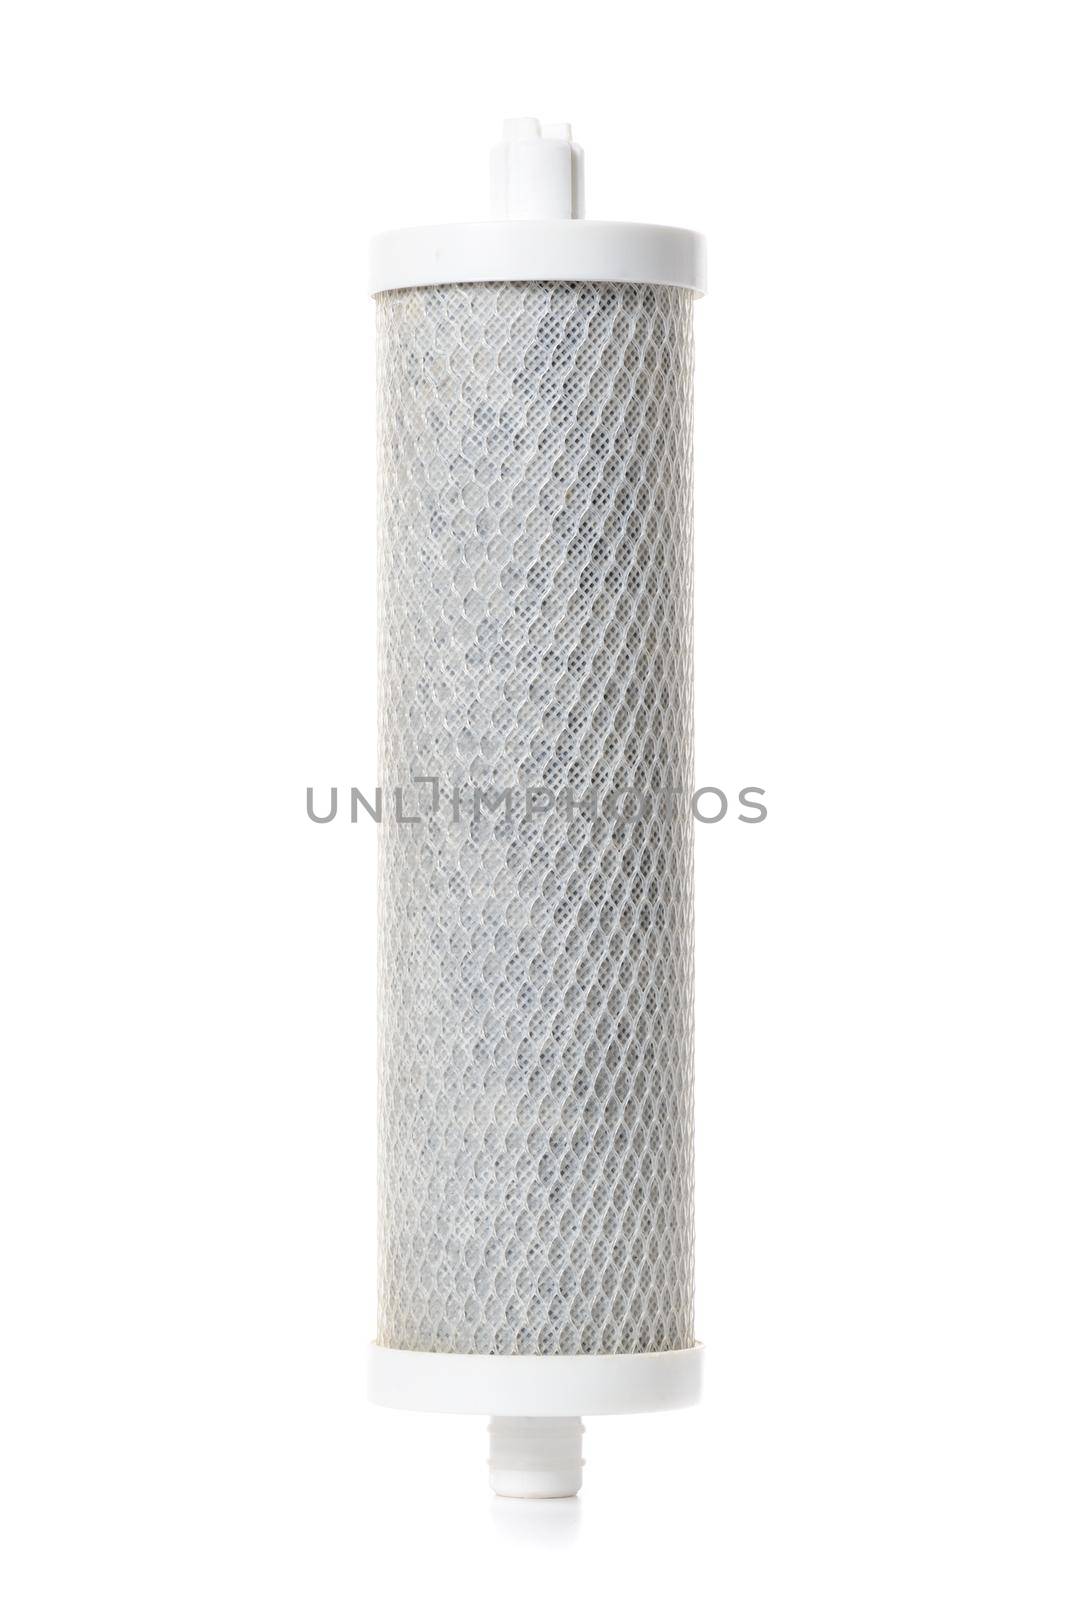 used cartridge for water filtration, activated carbon block filter